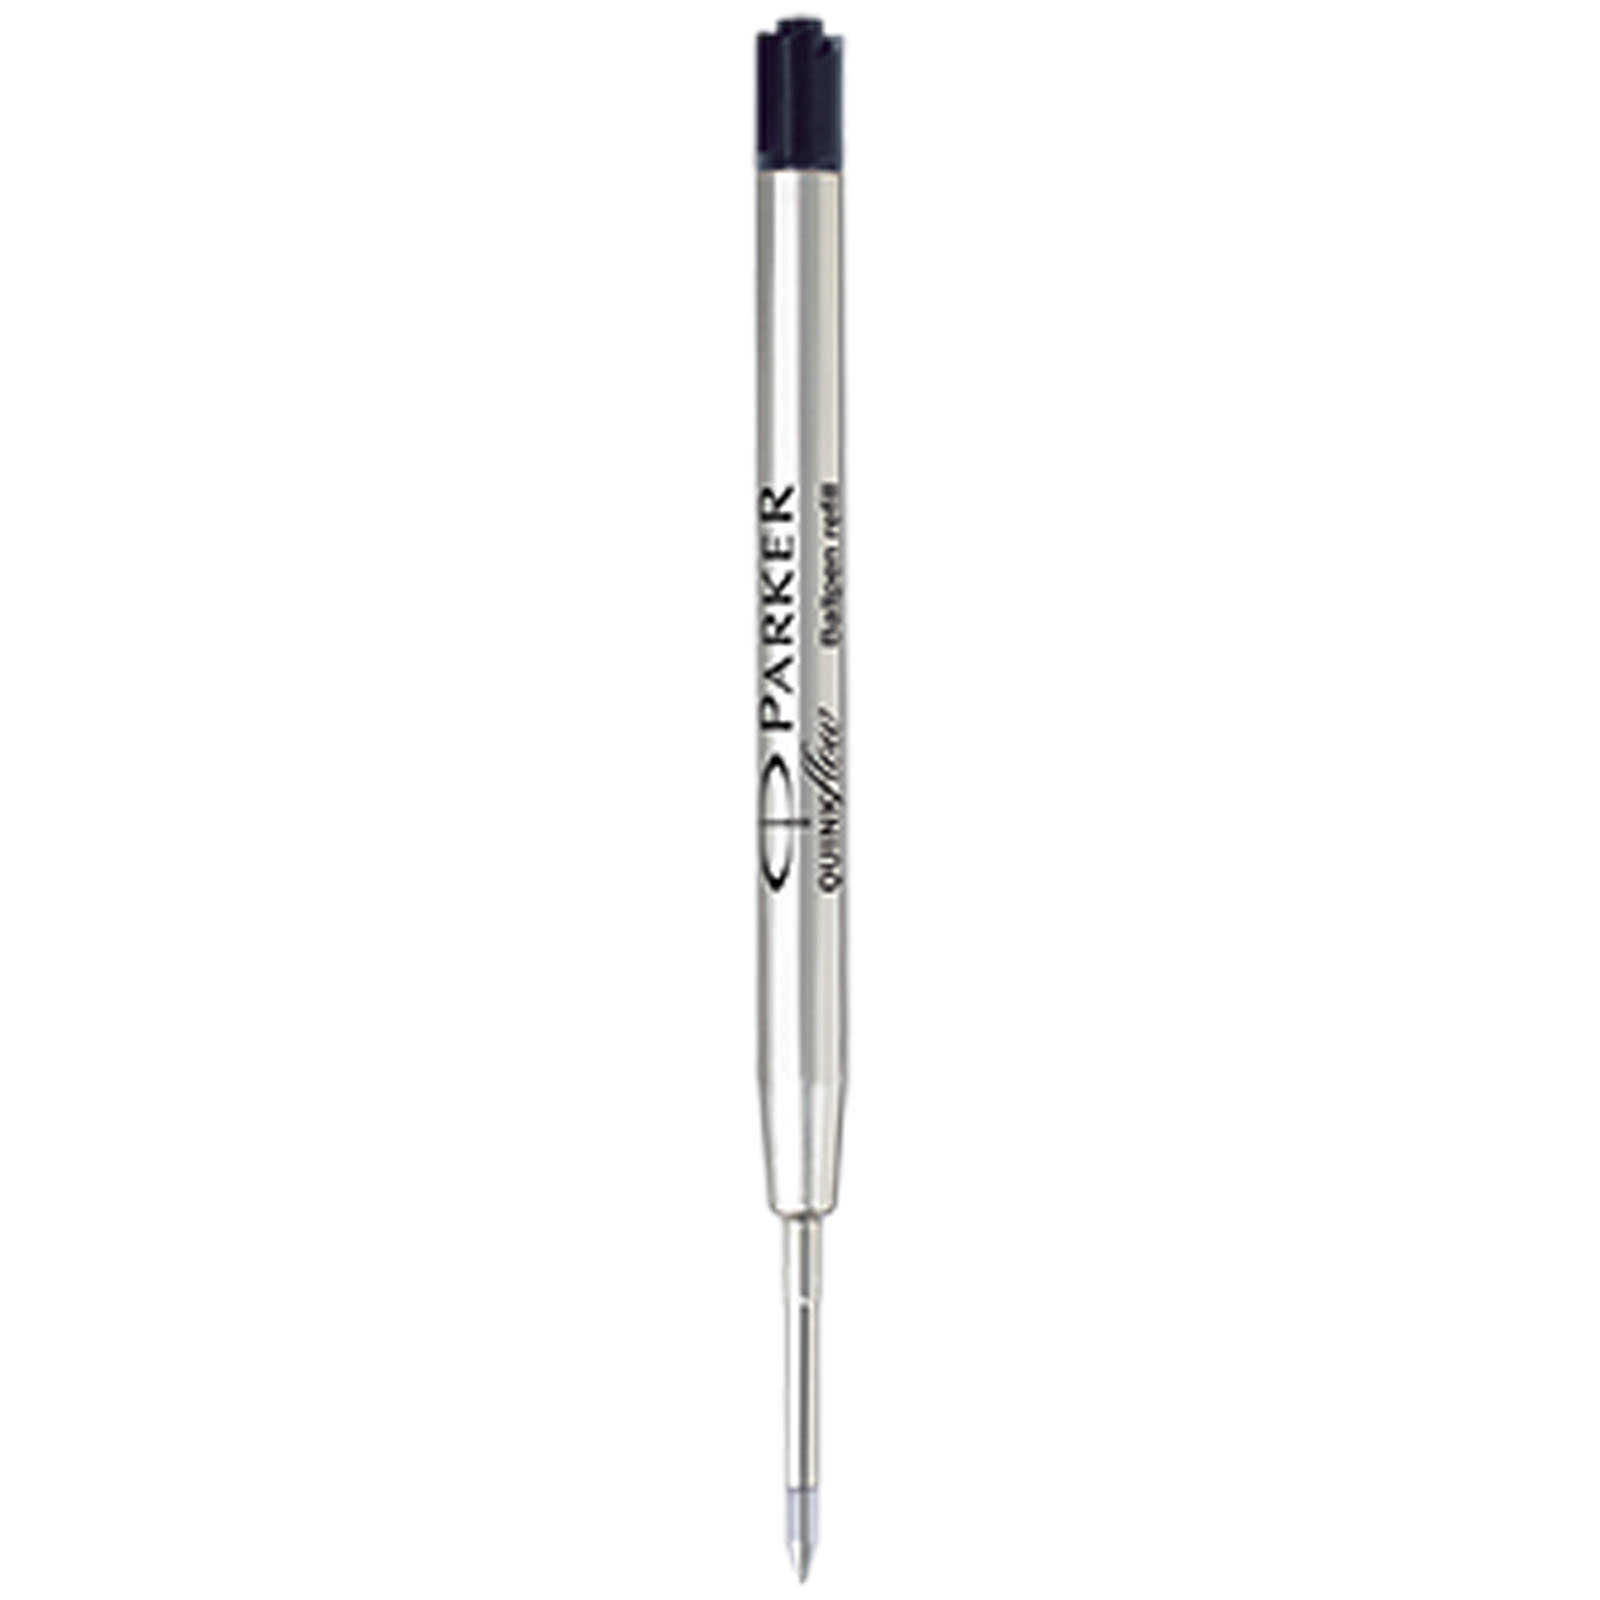 Advertising Other Pens & Writing Accessories - Parker Quinkflow ballpoint pen refill - 1